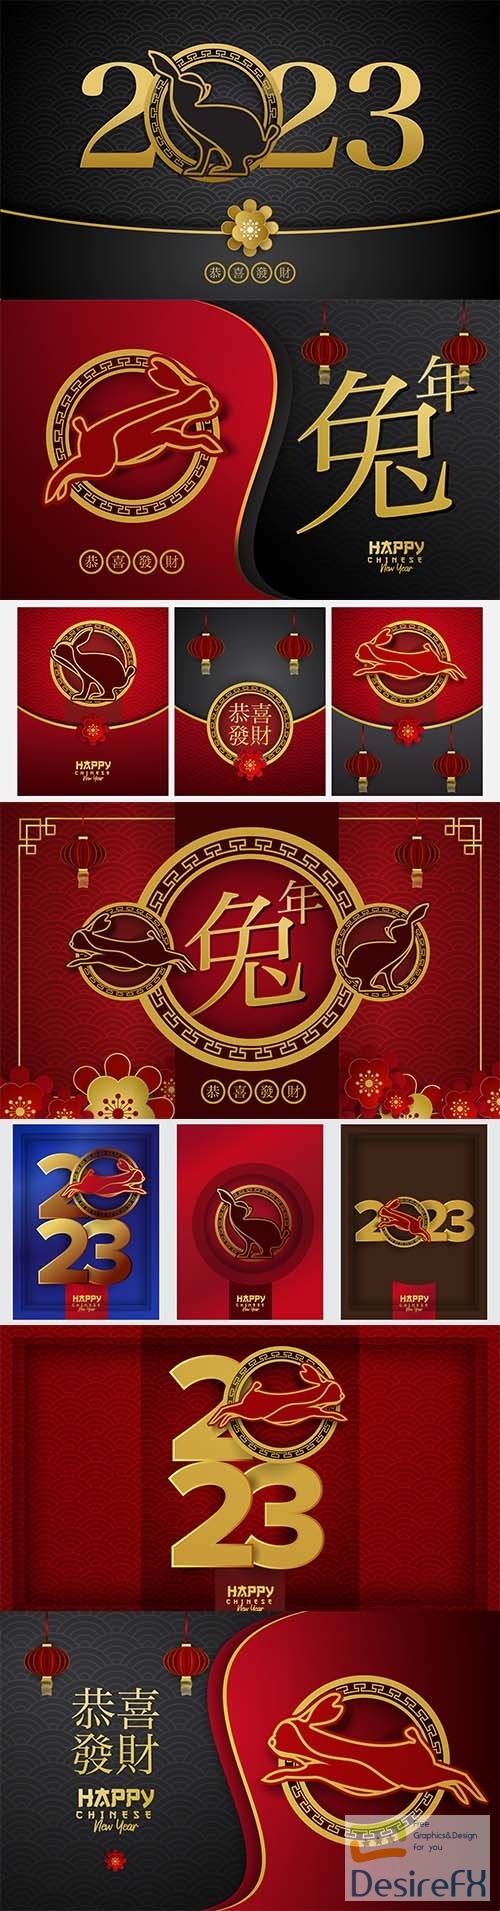 2023 happy chinese new year red gold rabbit bunny zodiac